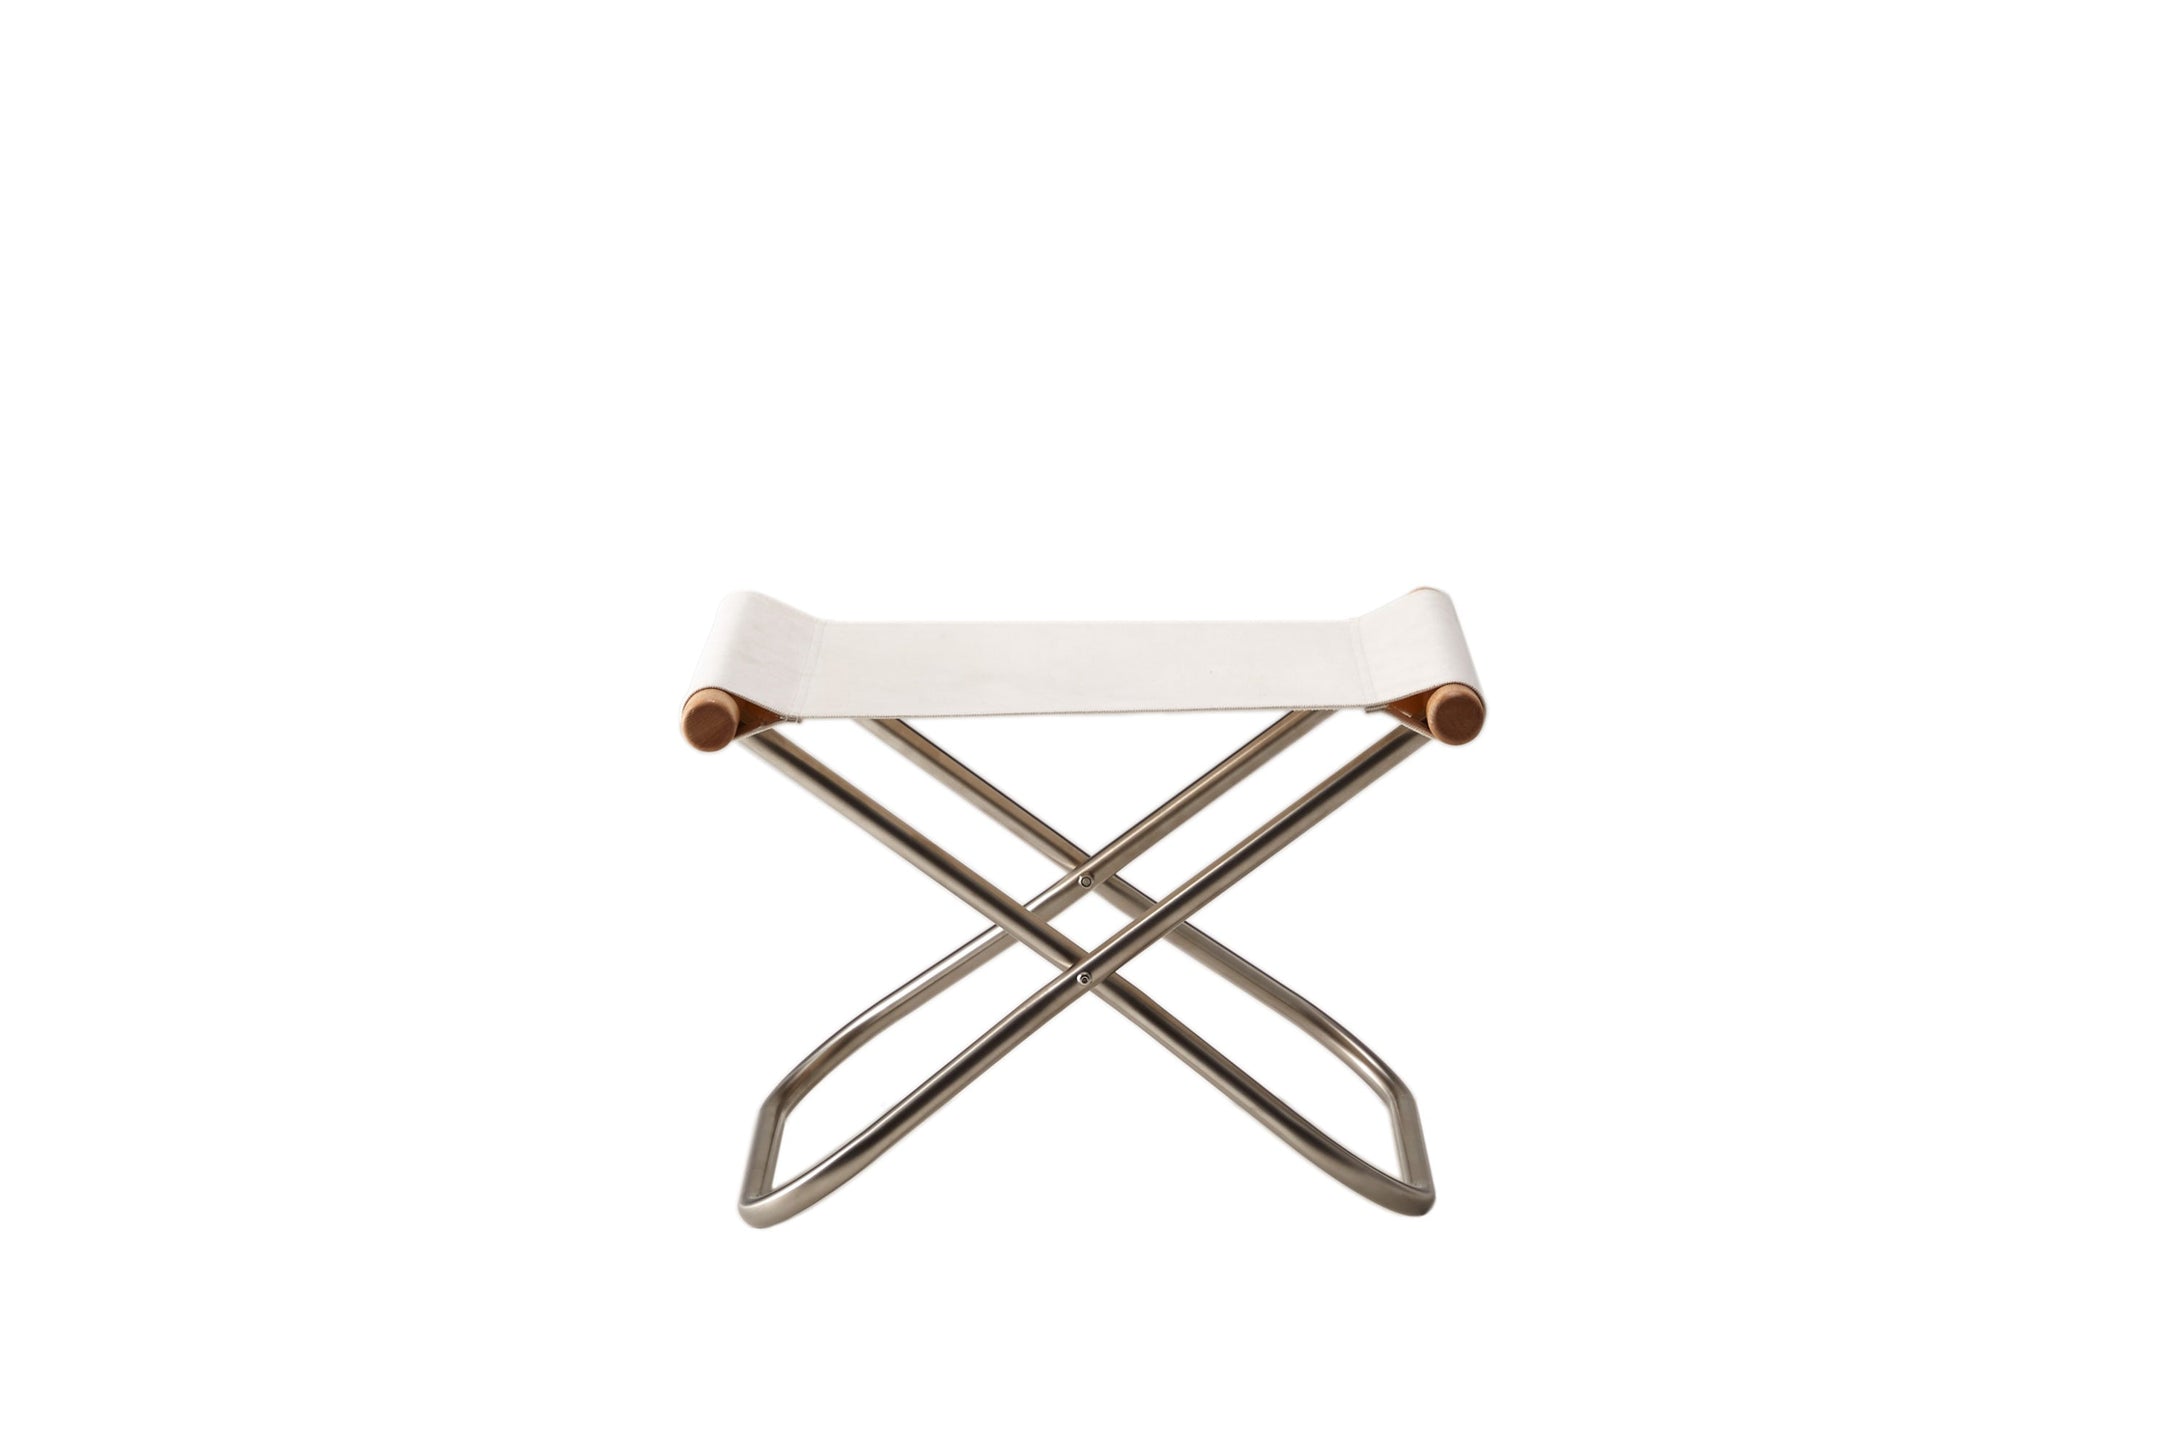 Nychair X Ottoman – choices by IMPLEMENTS